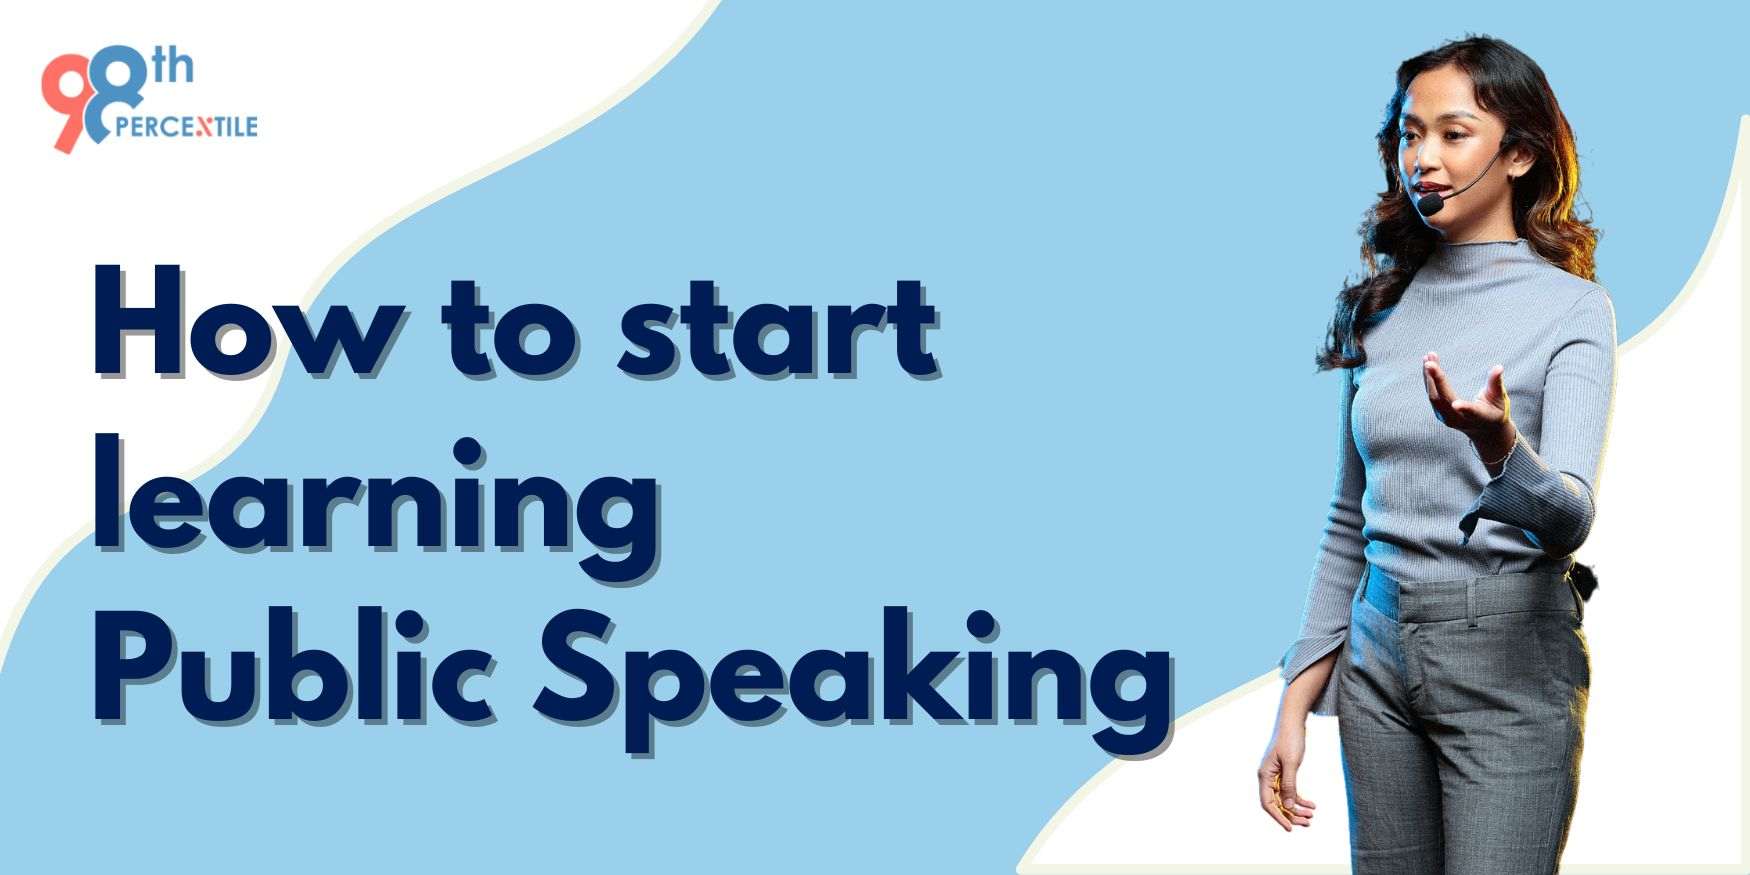 Conquer fear of public speaking